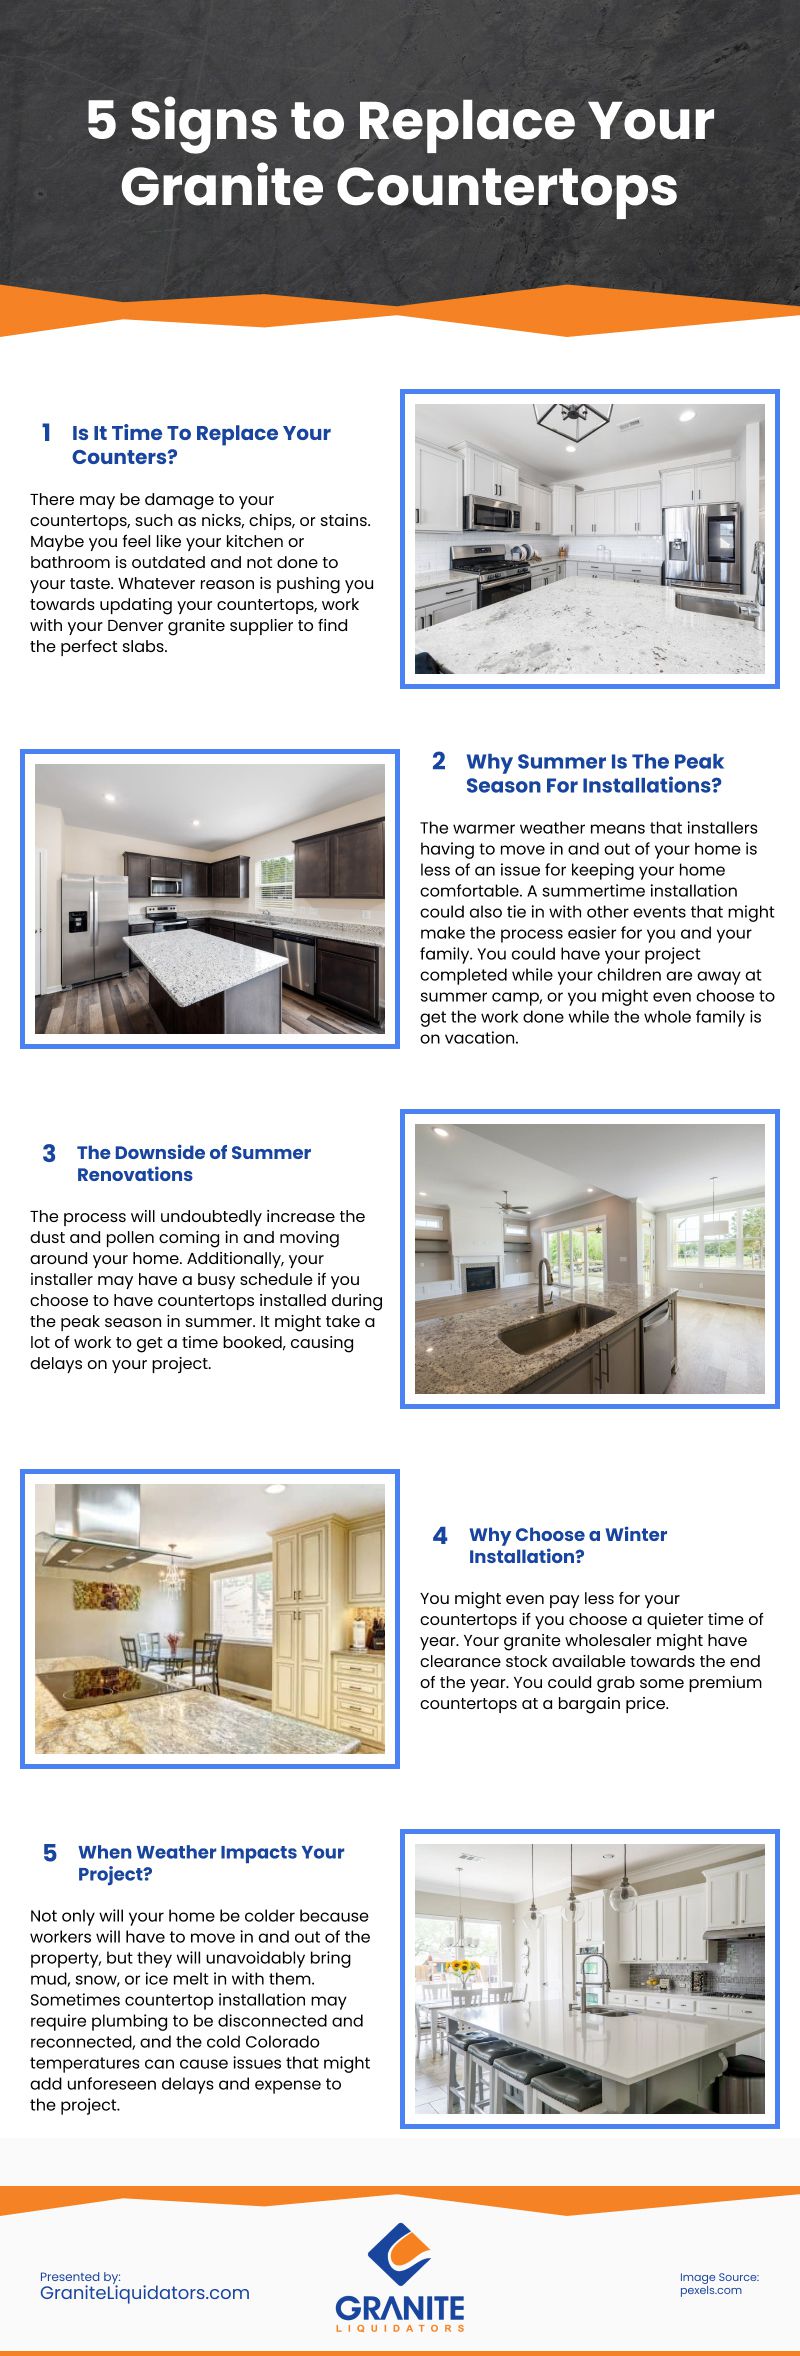 5 Signs to Replace Your Granite Countertops Infographic